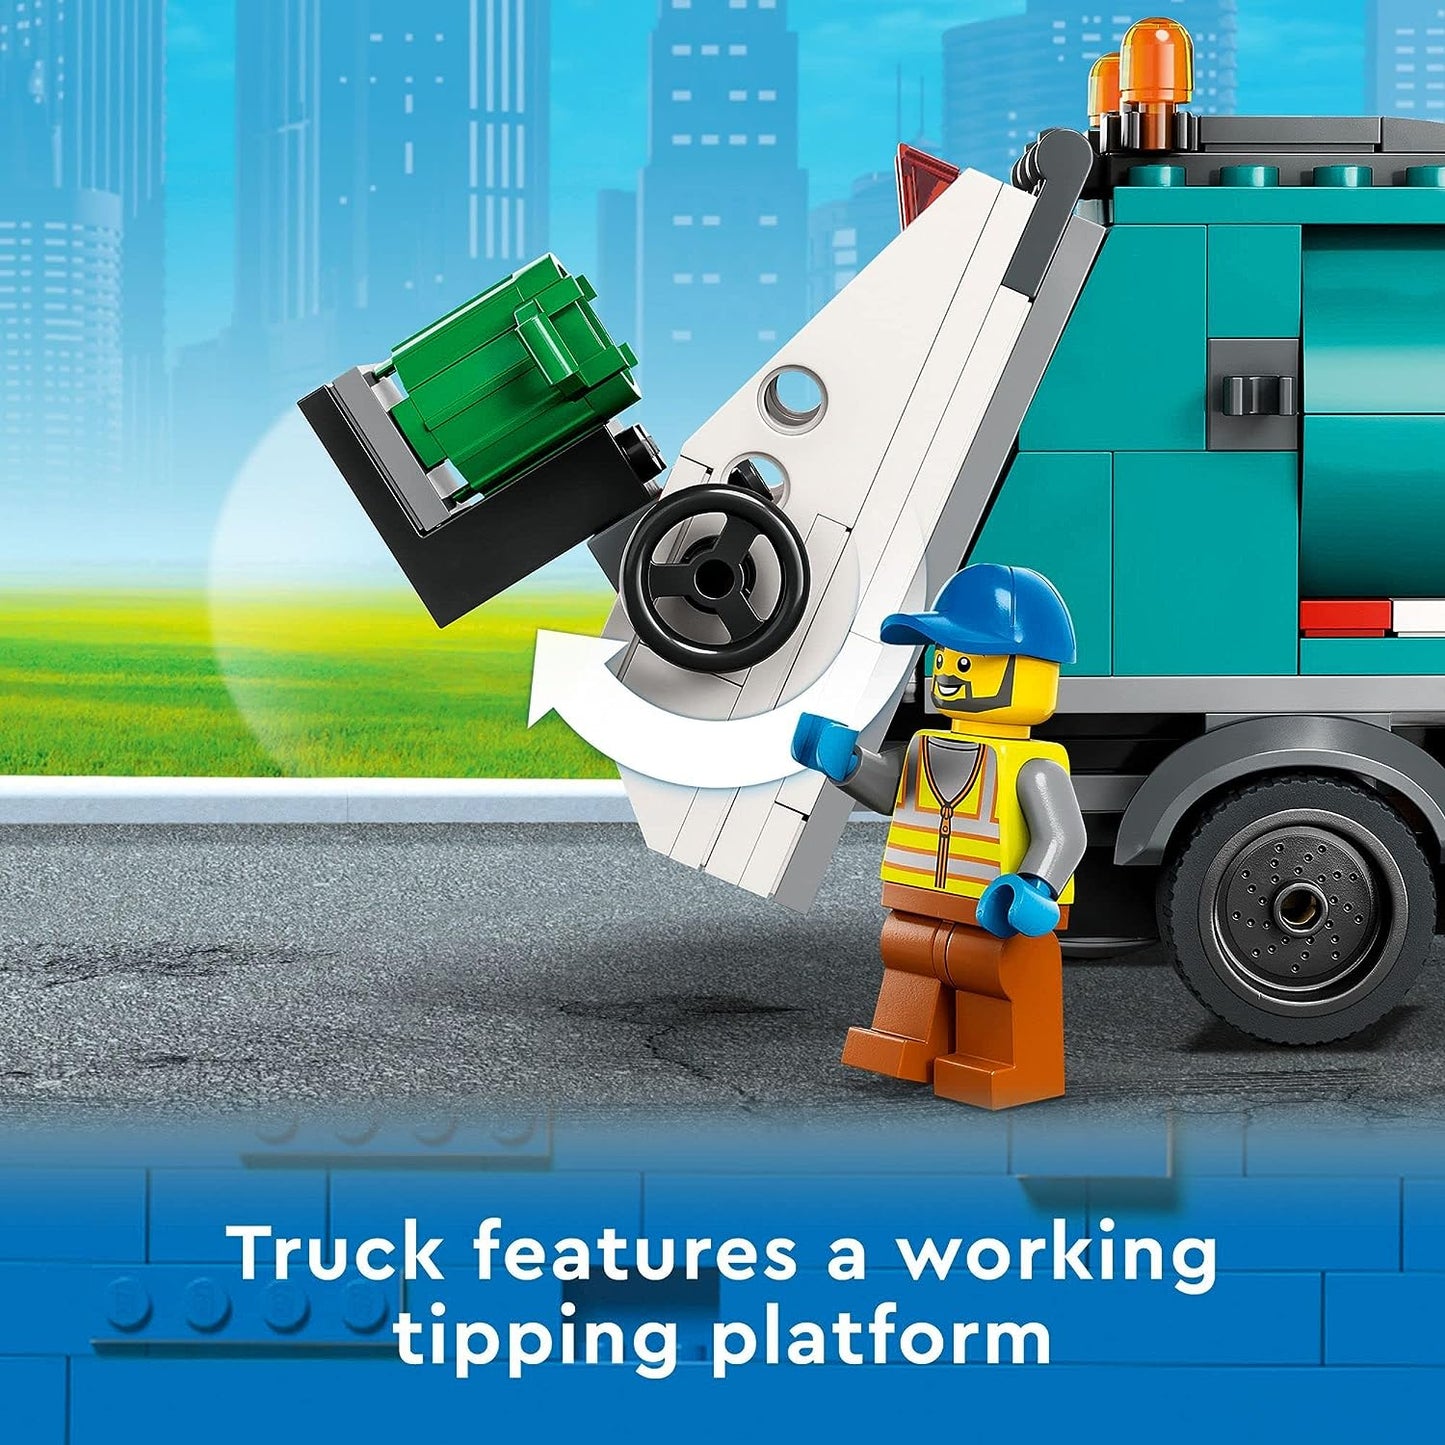 LEGO City - Recycling Truck 60386